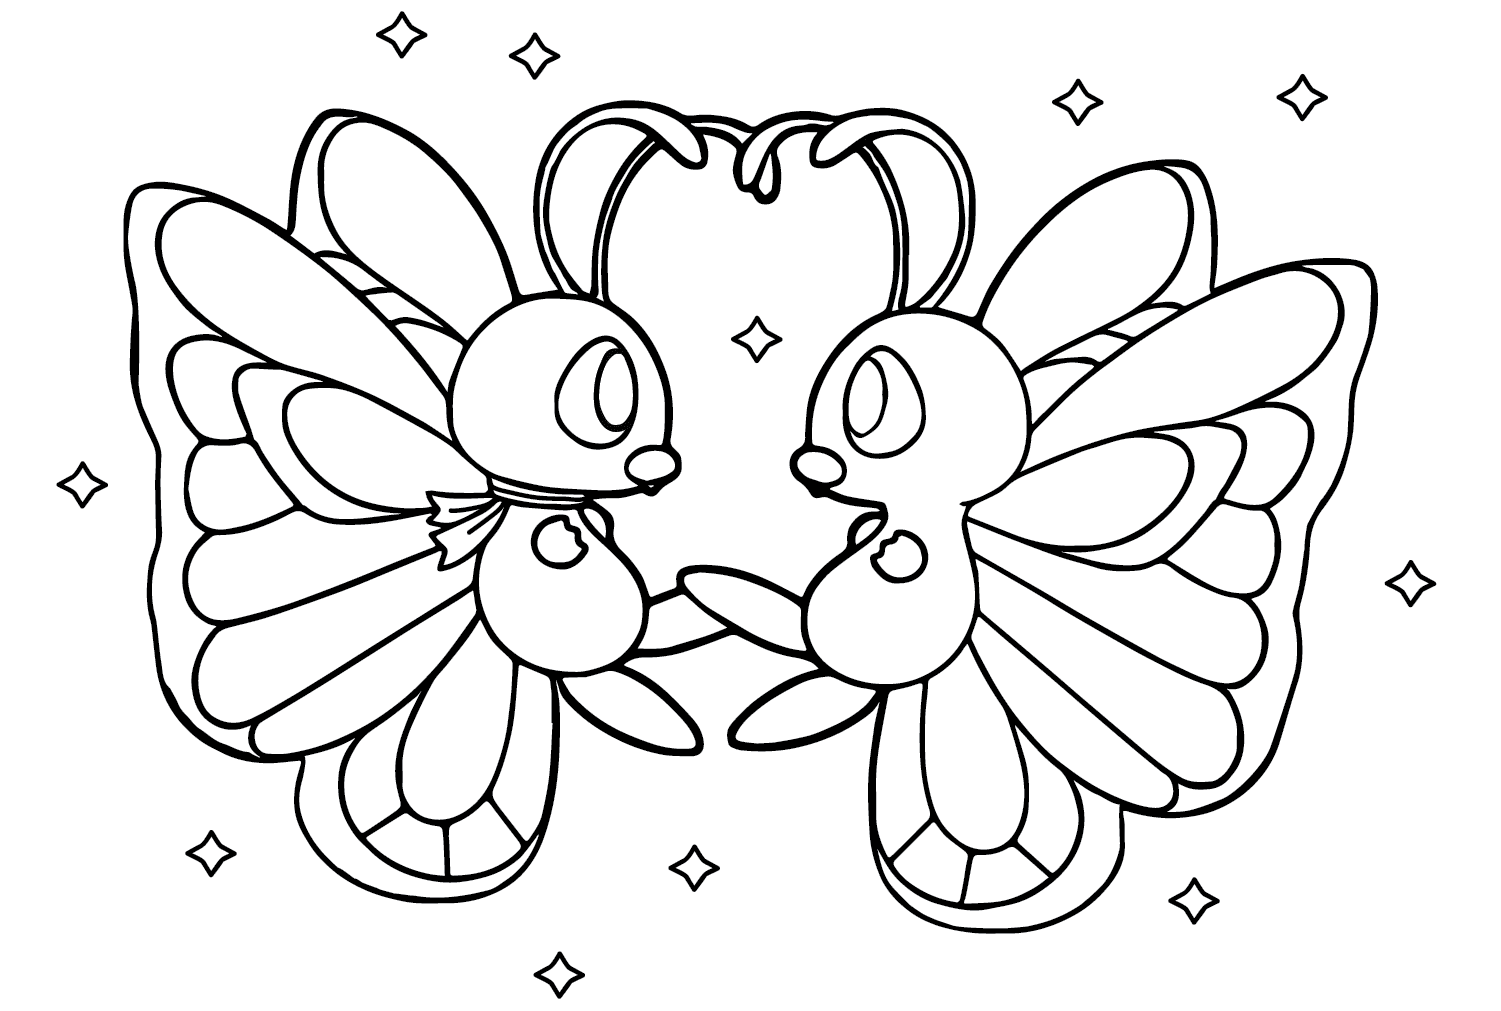 Pokemon Butterfree Coloring Page from Butterfree